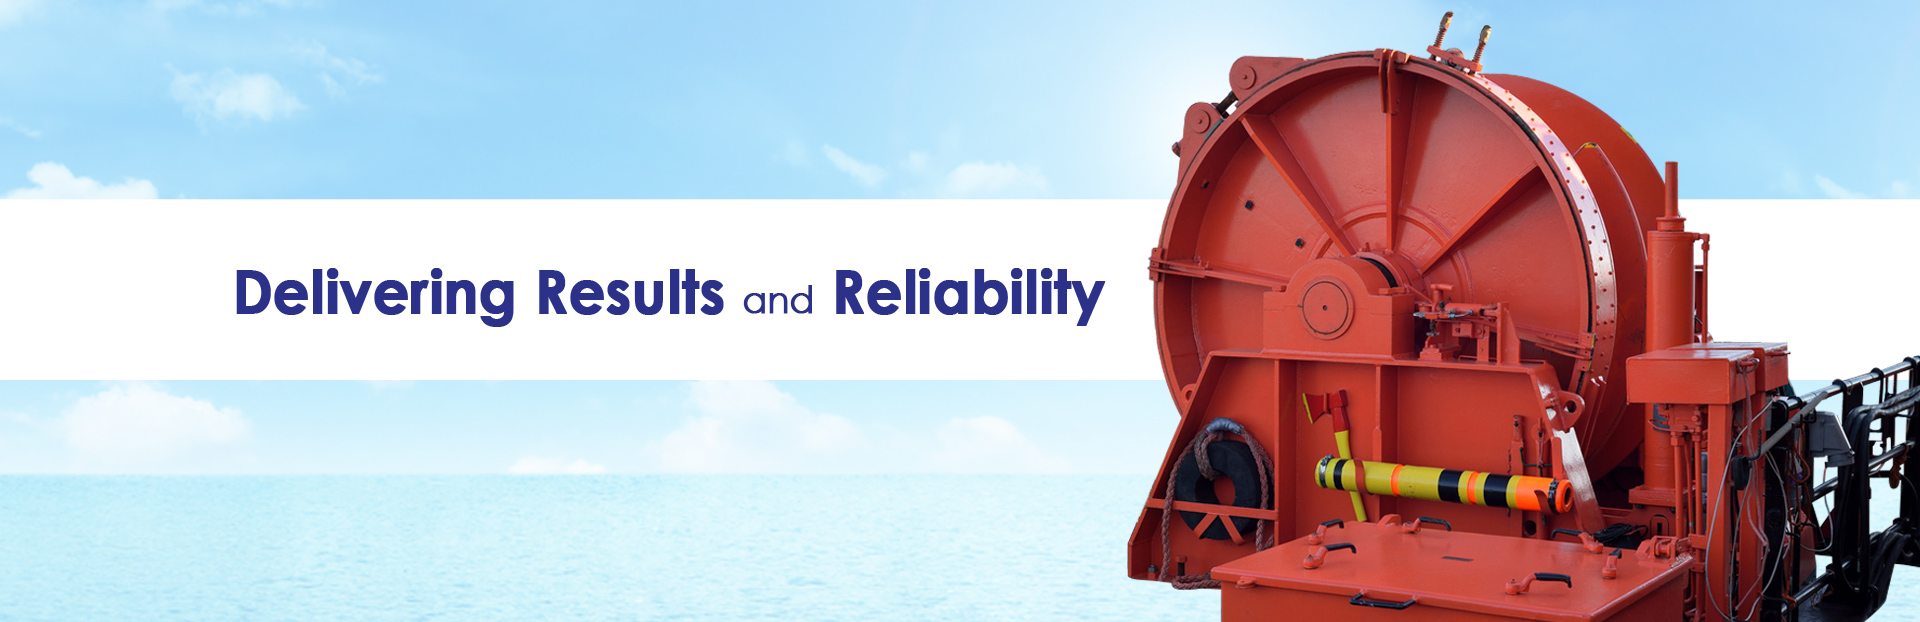 Delivering Results and Reliability